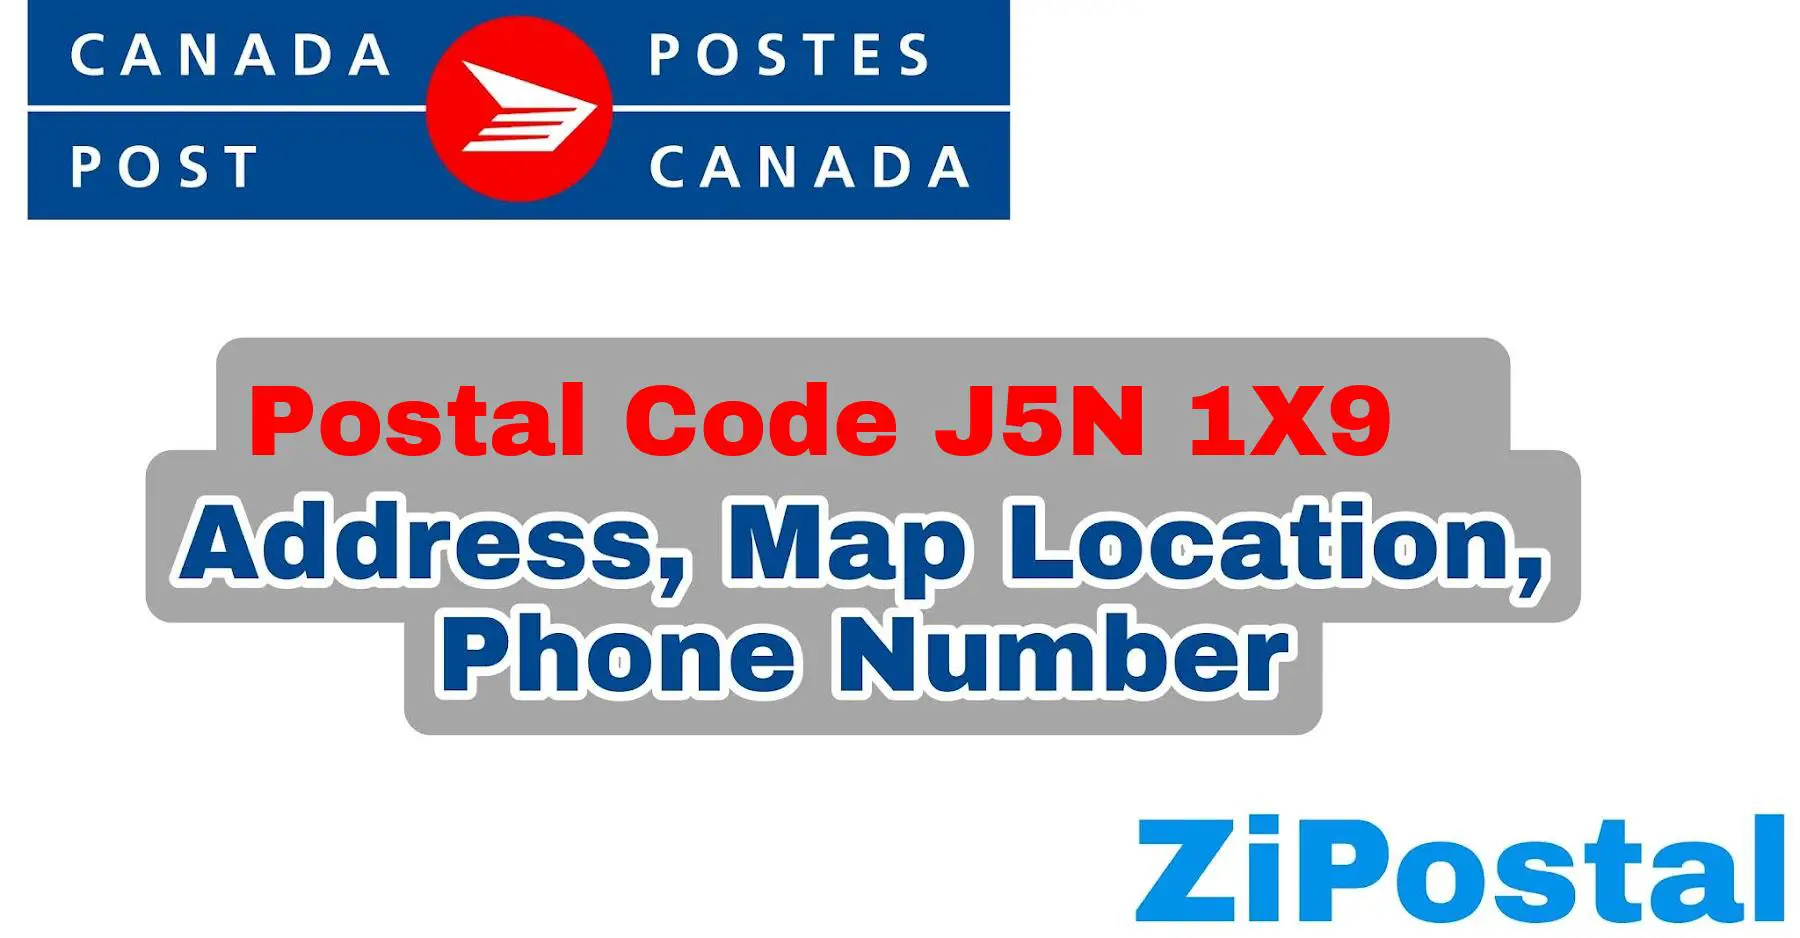 Postal Code J5N 1X9 Address Map Location and Phone Number